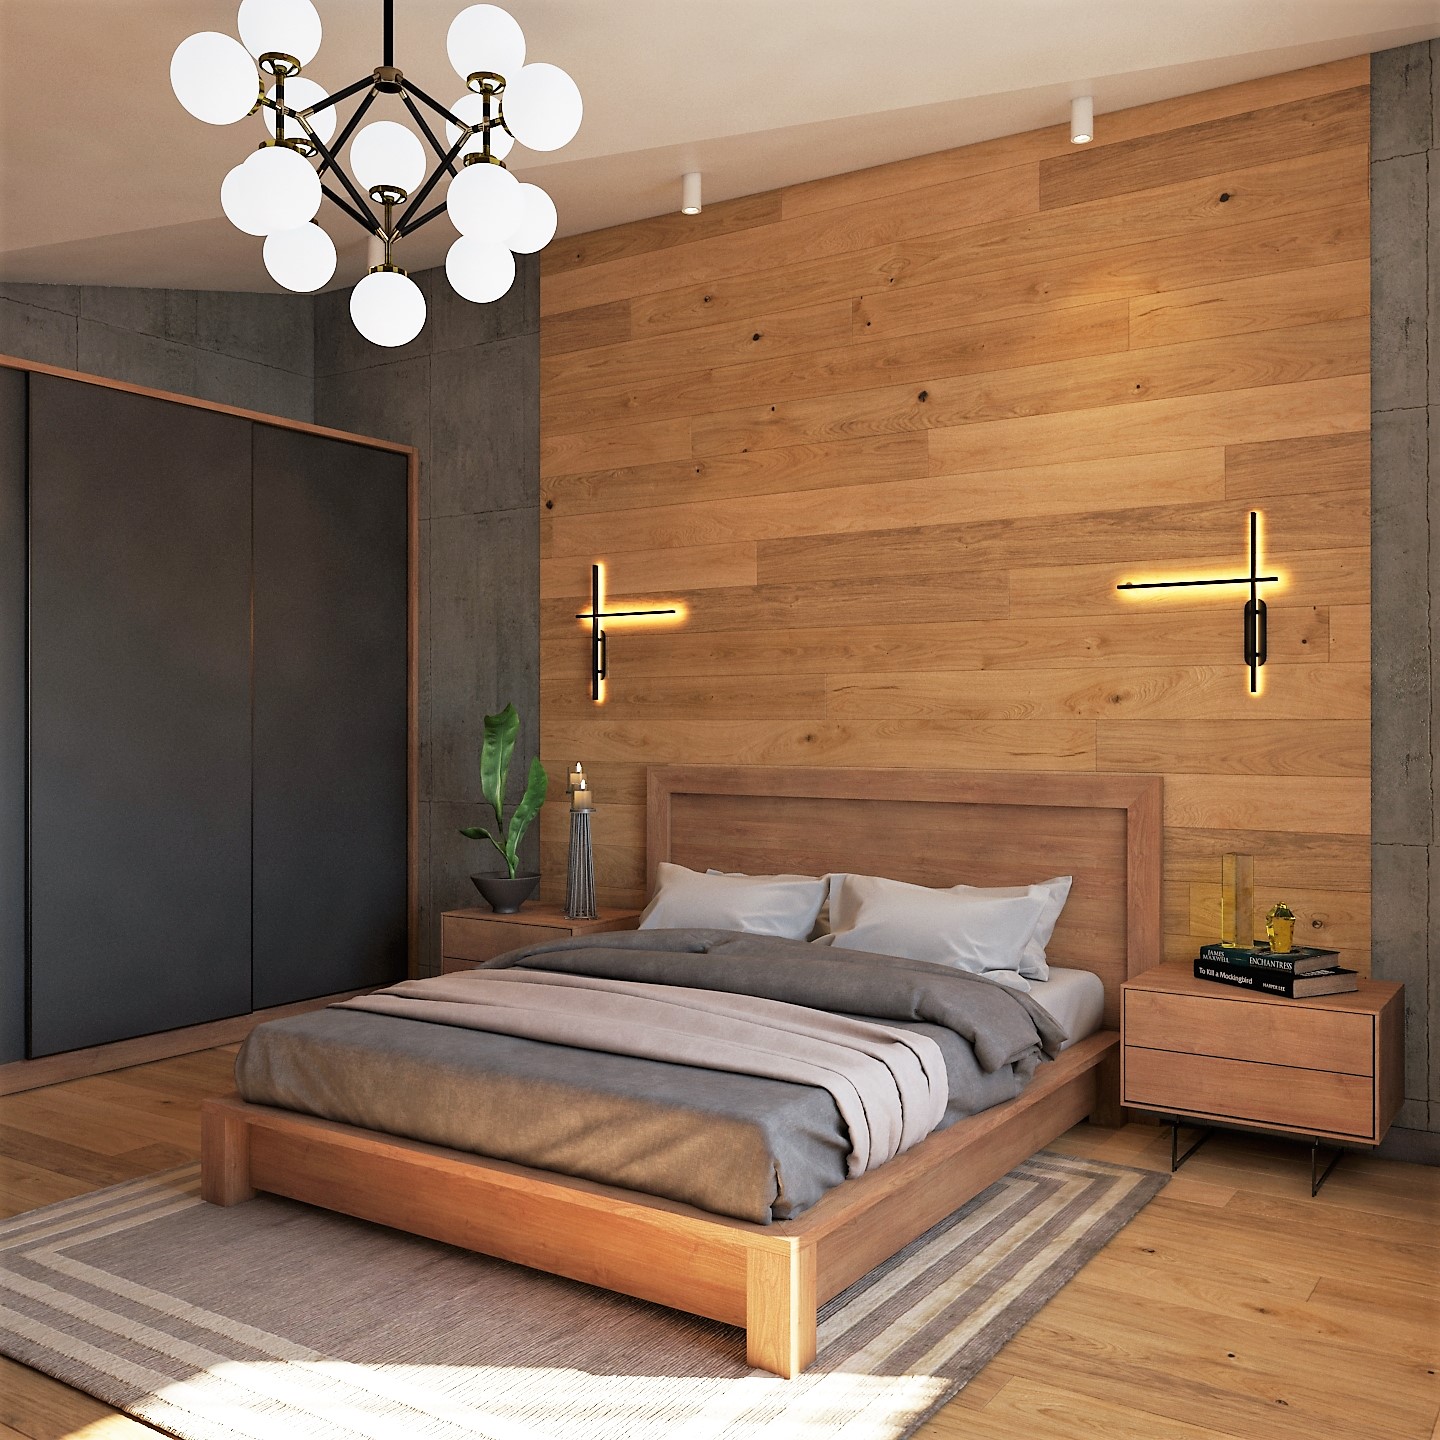 Bedroom of a young bachelor in 3d max vray 5.0 image